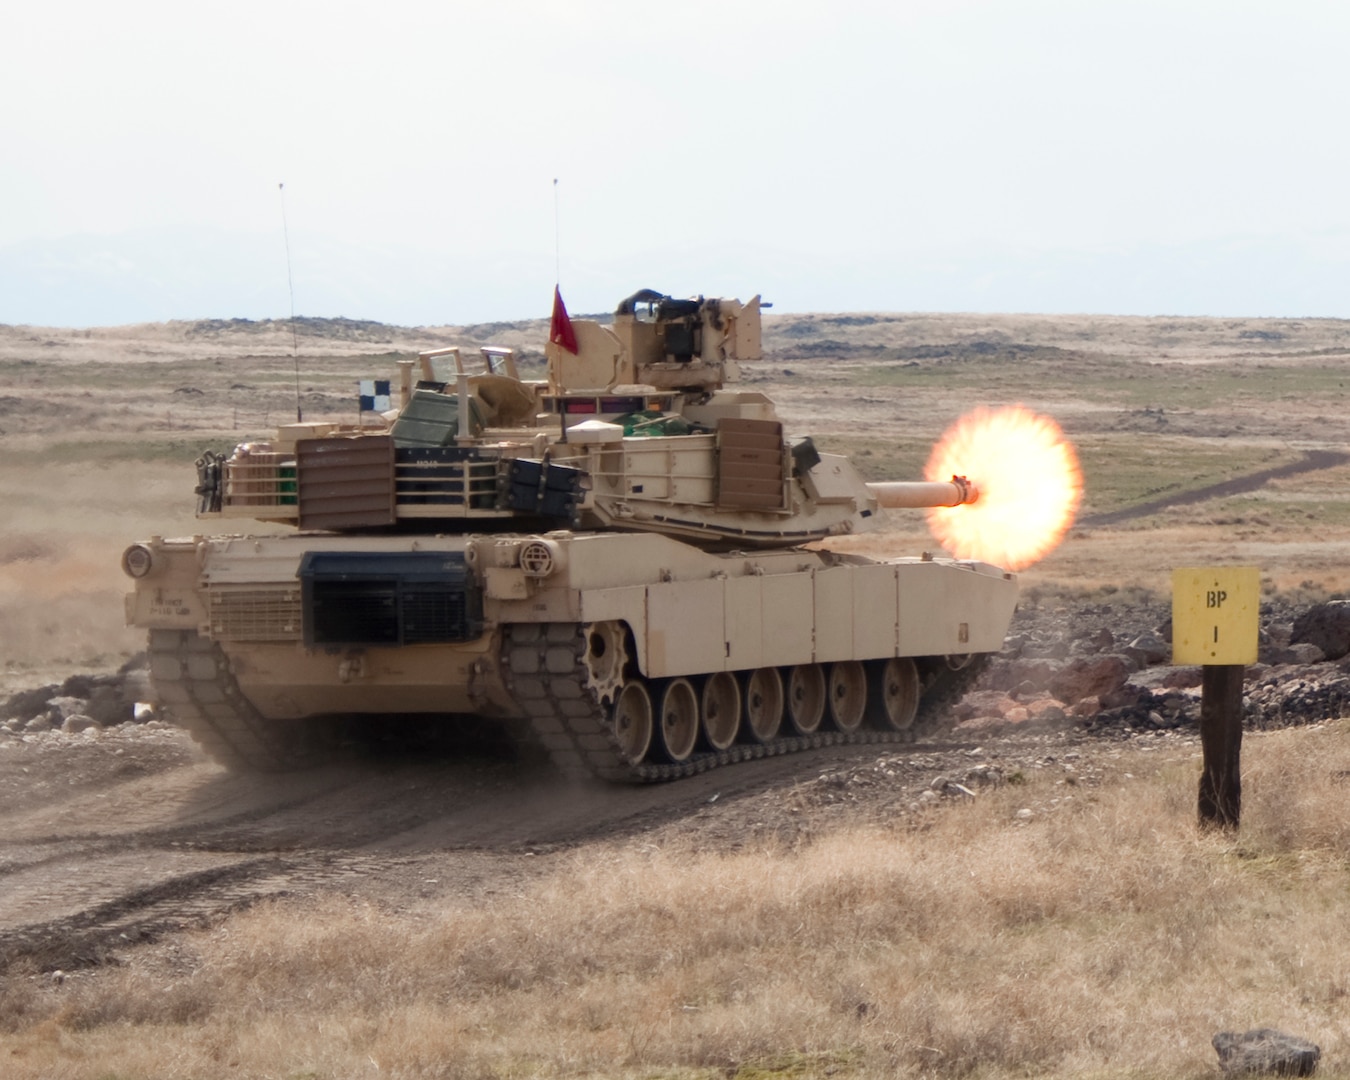 Idaho unit practices with tanks again